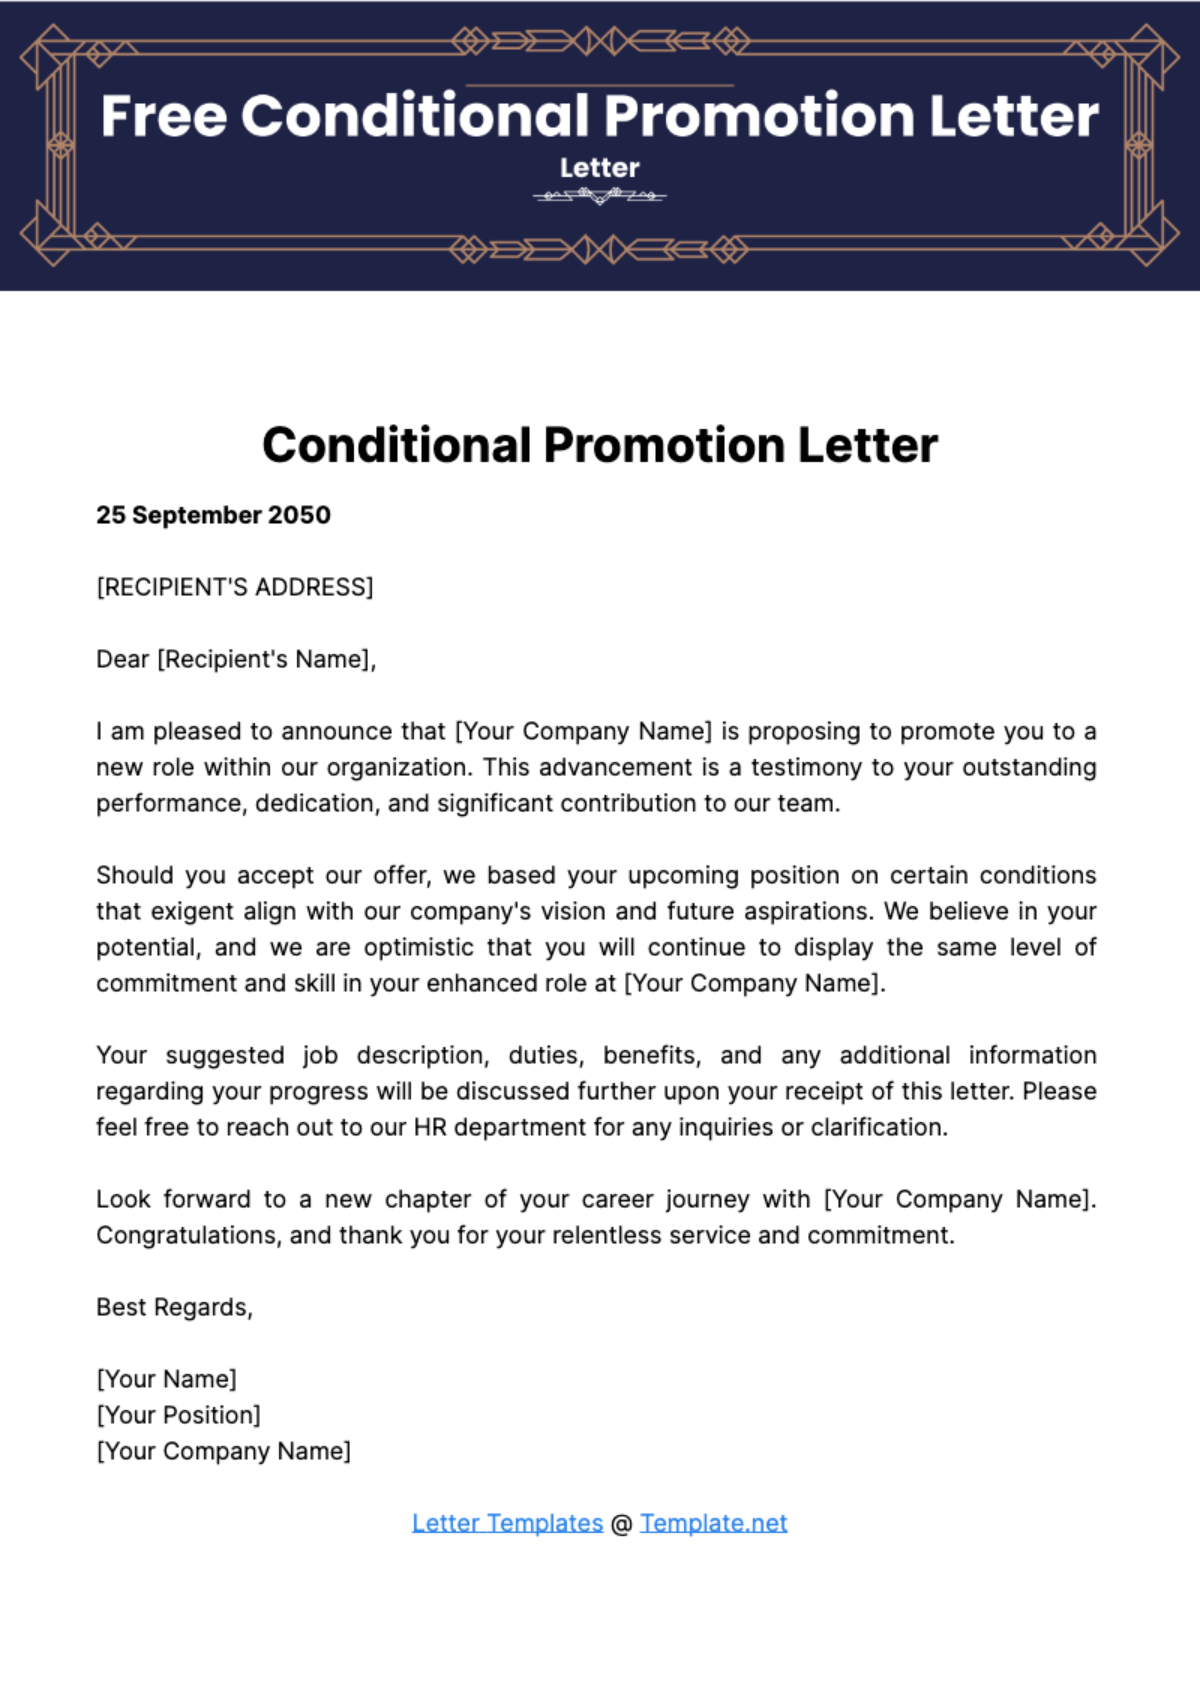 Conditional Promotion Letter Template